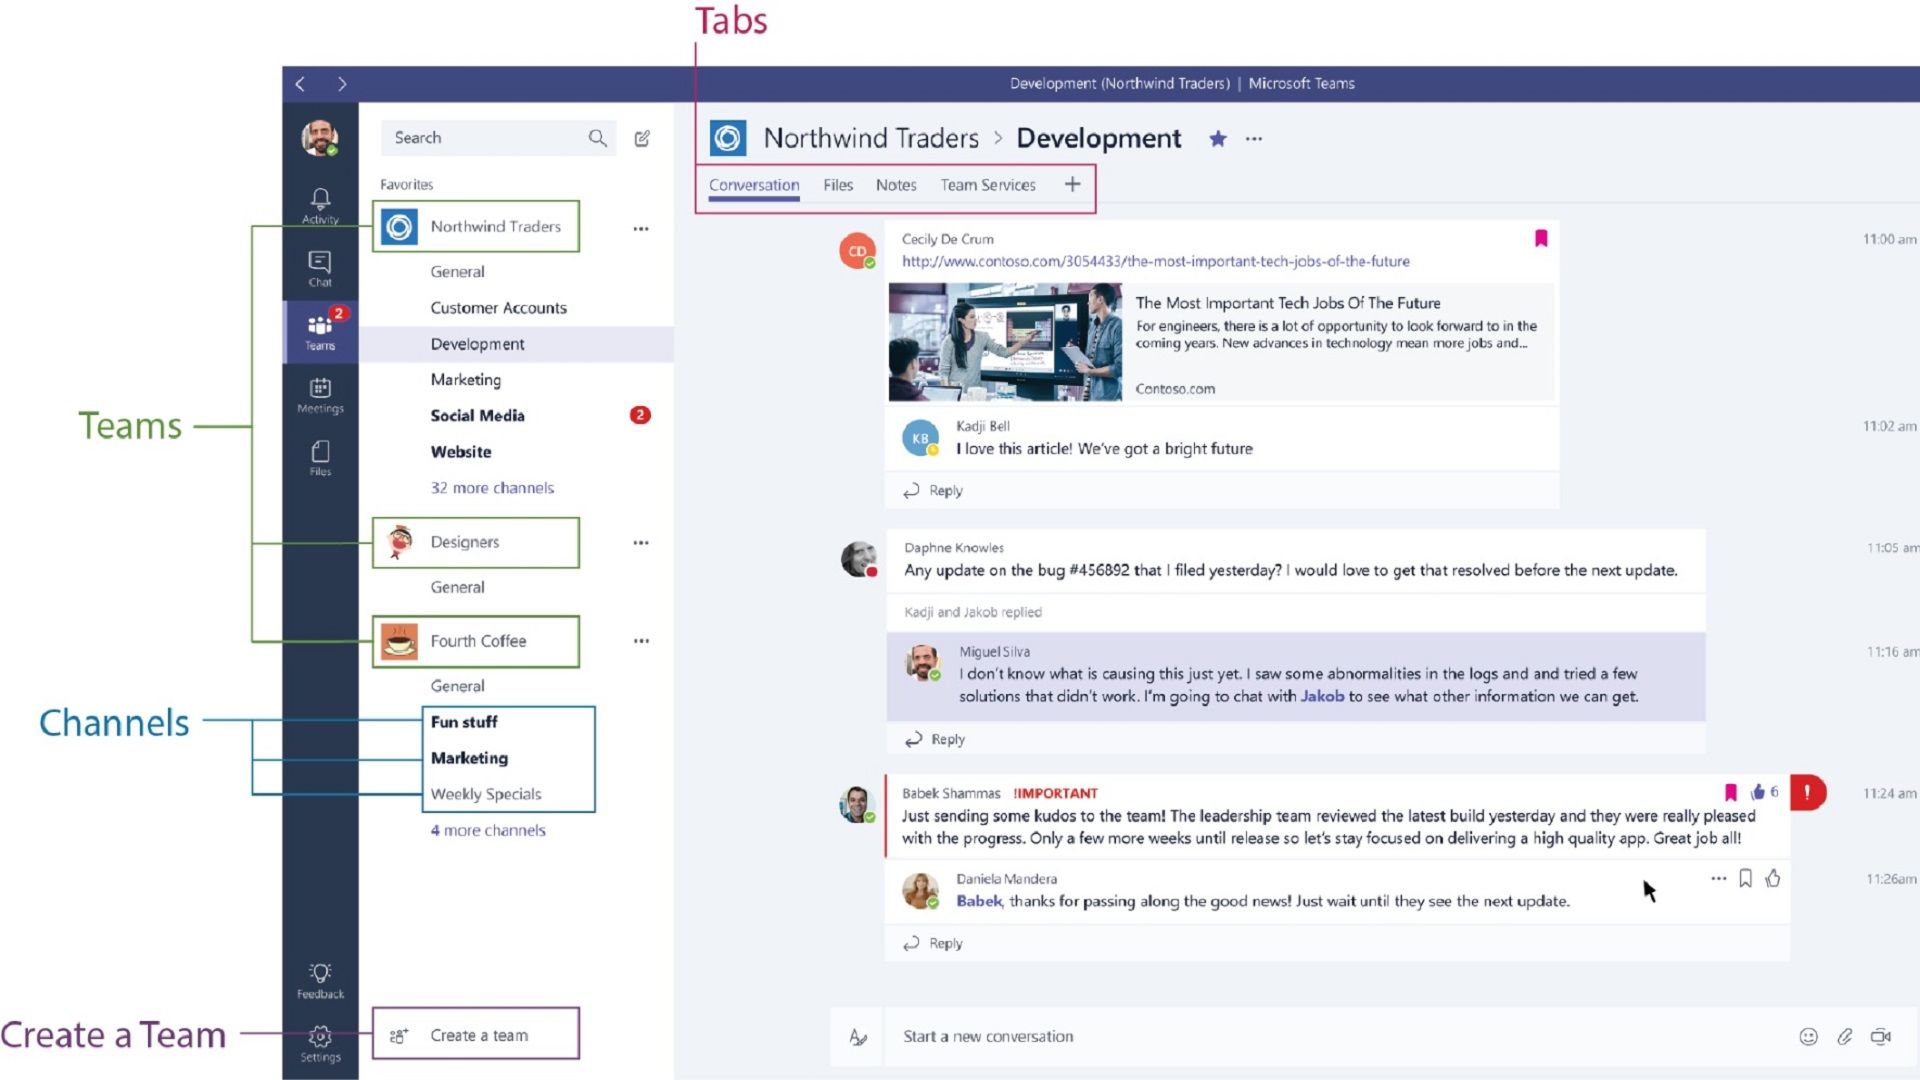 What Is Microsoft Teams The Slack Like App For Office 365 Explained image 1